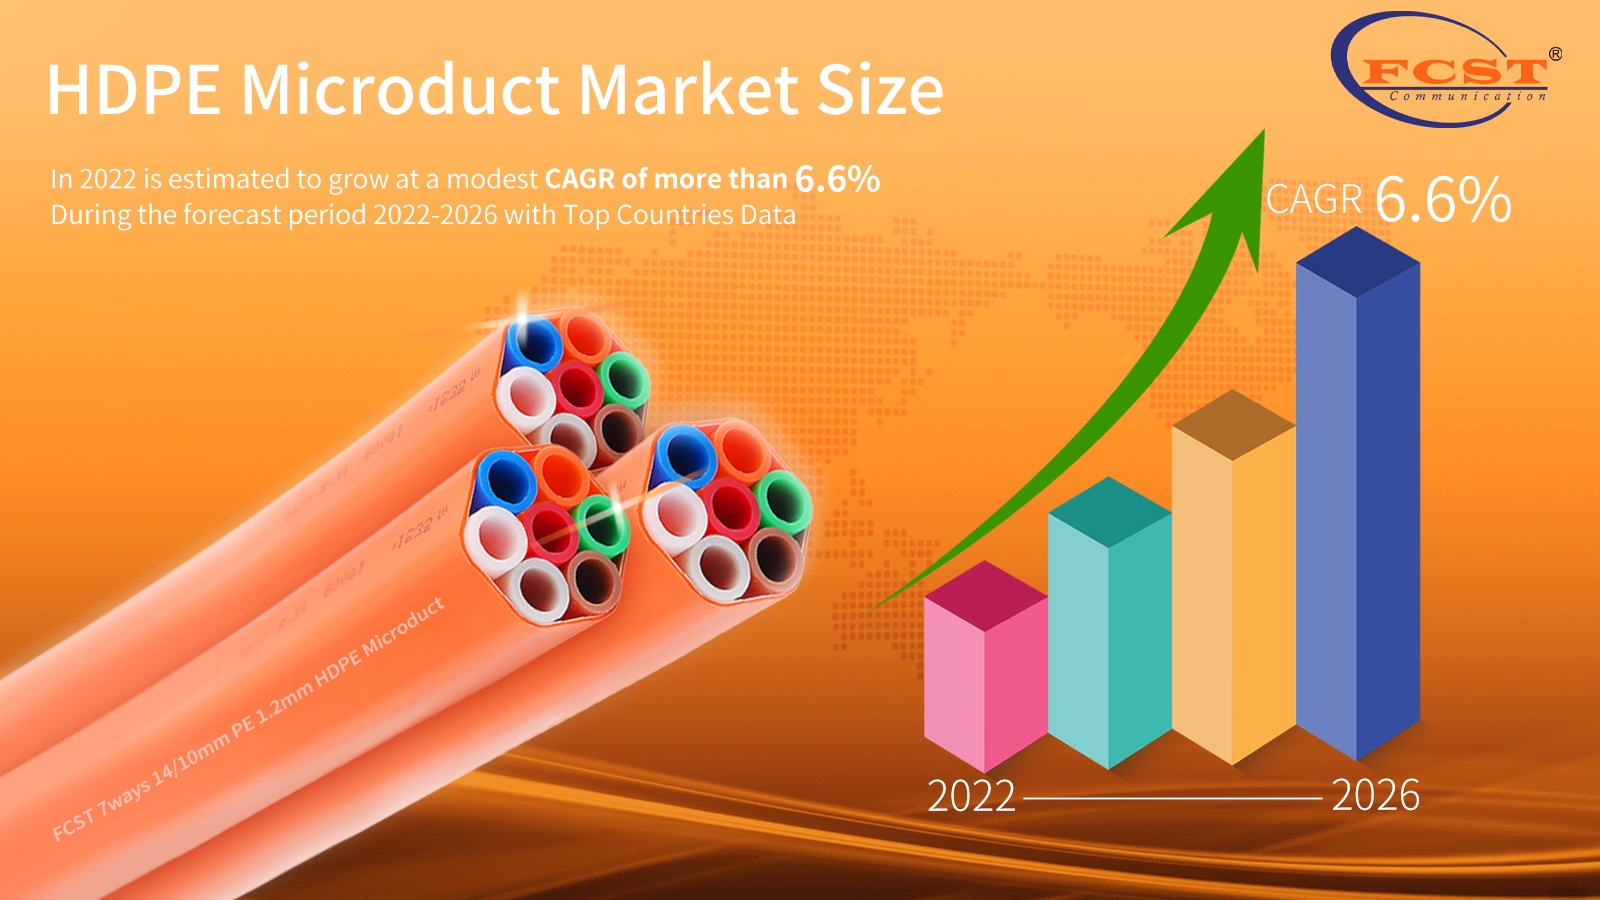 HDPE Microduct Market Size In 2022 is estimated to grow at a modest CAGR of more than 6.6% During the forecast period 2022-2026 with Top Countries Data